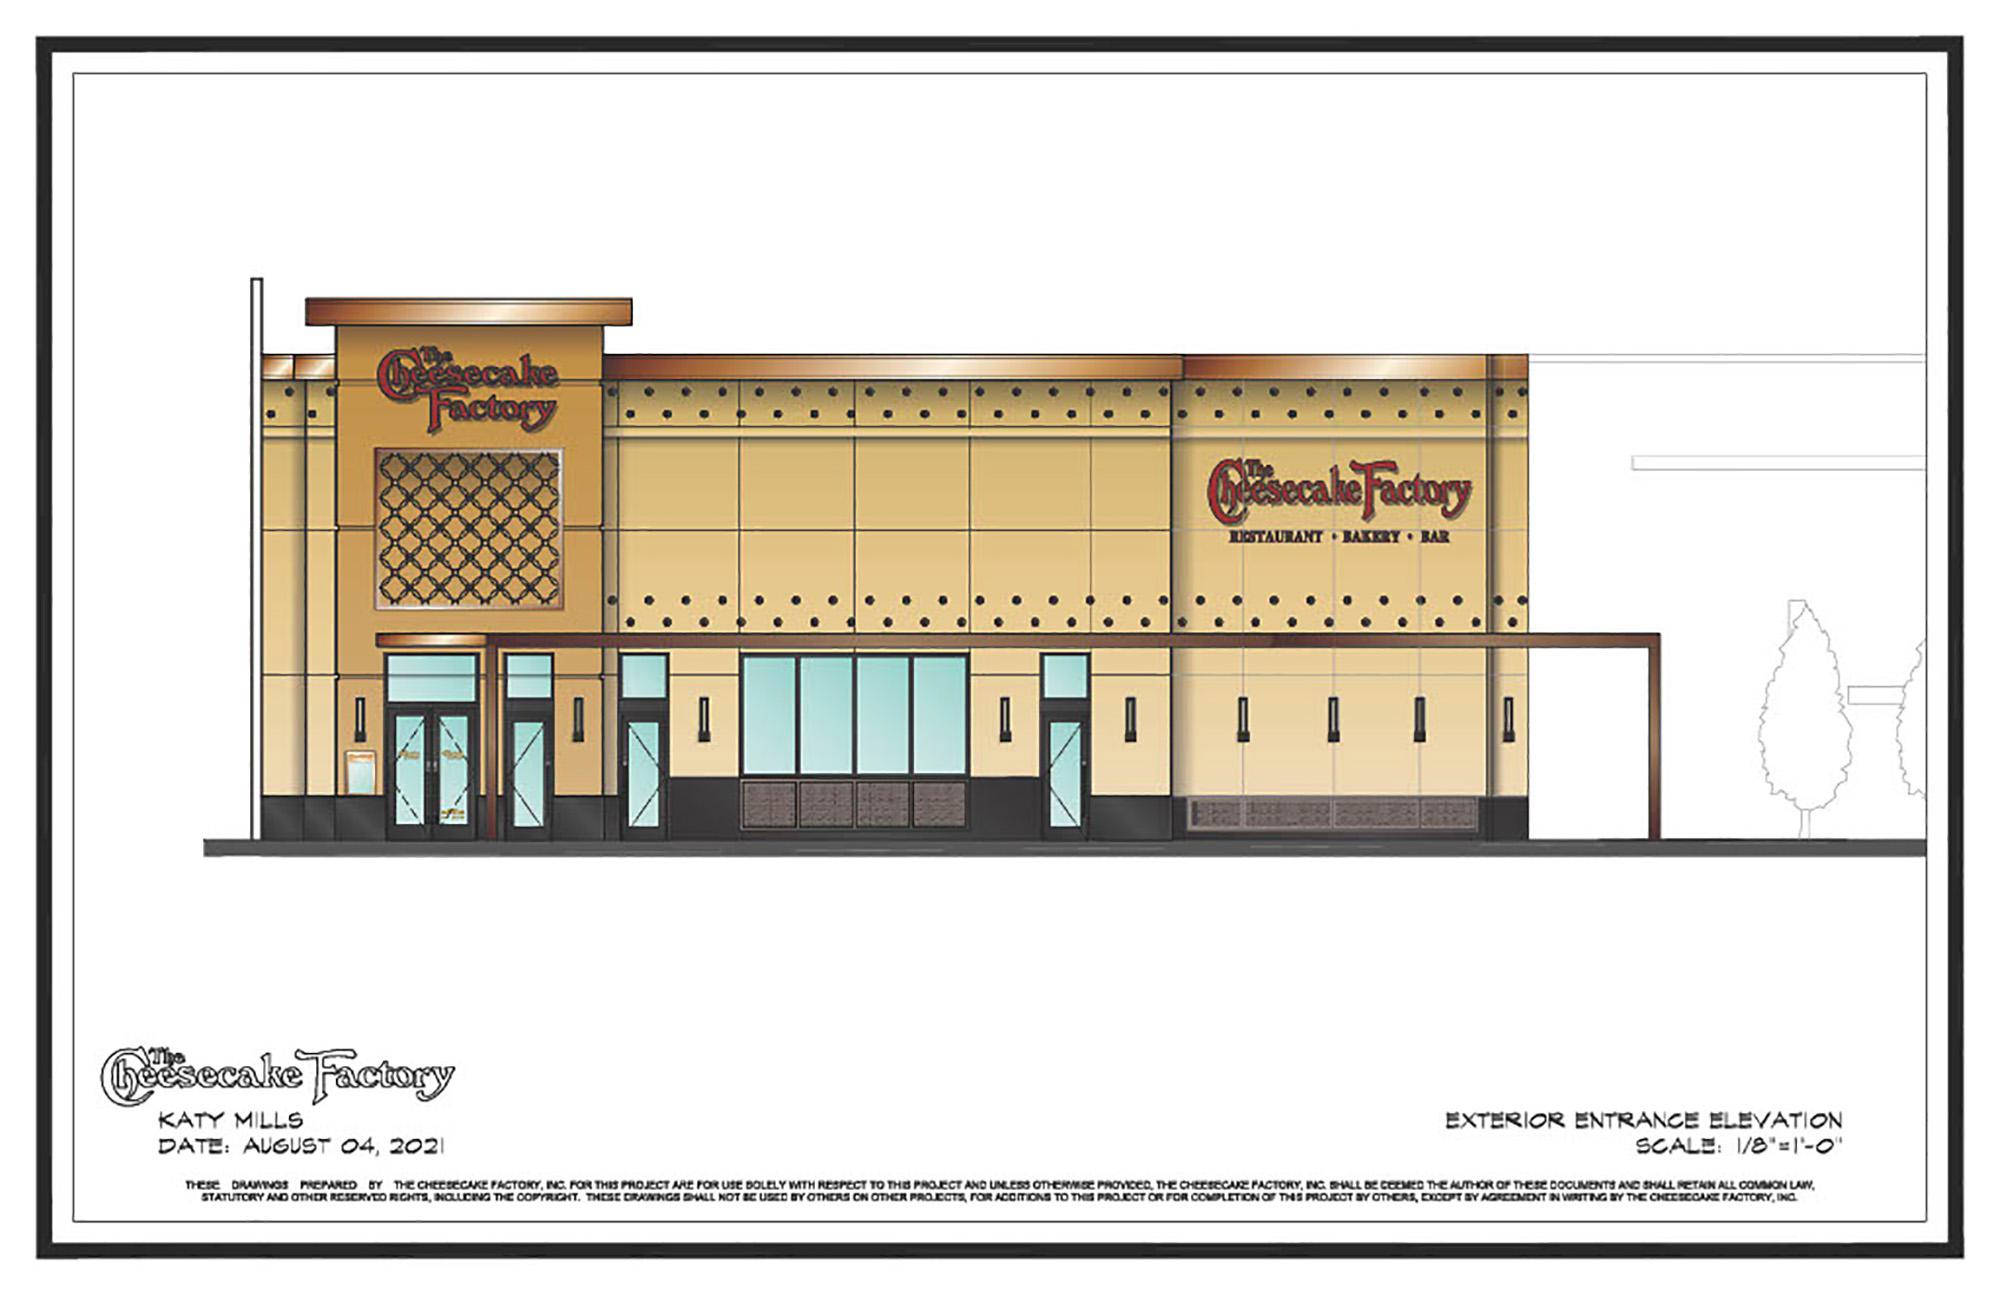 The Cheesecake Factory is coming to Katy Mills Mall